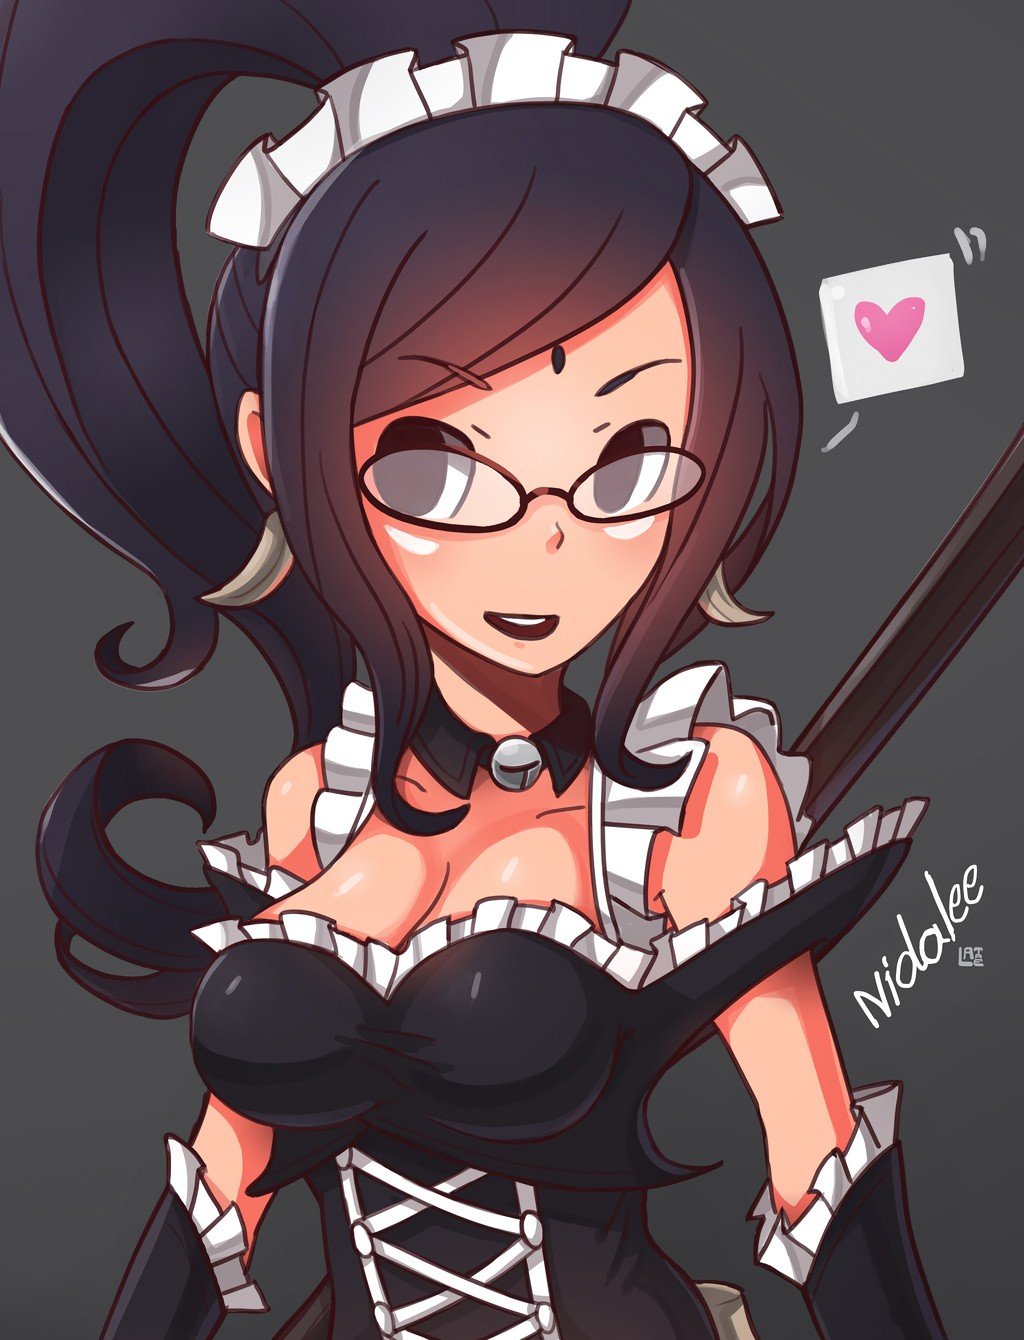 bill diel recommends french maid nidalee fan art pic